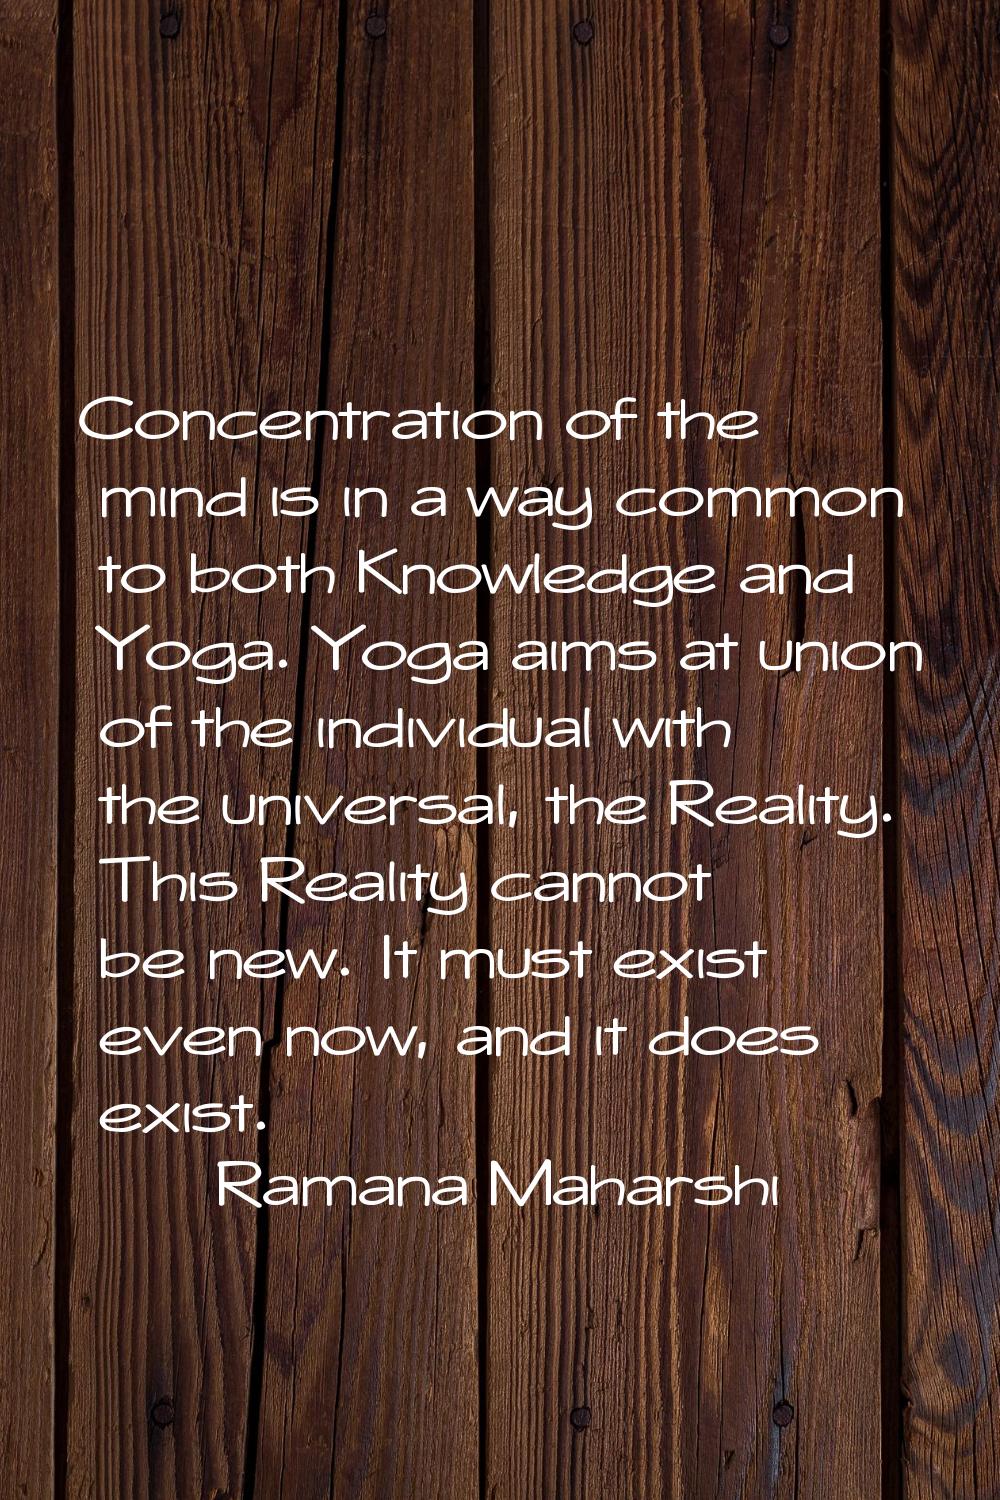 Concentration of the mind is in a way common to both Knowledge and Yoga. Yoga aims at union of the 